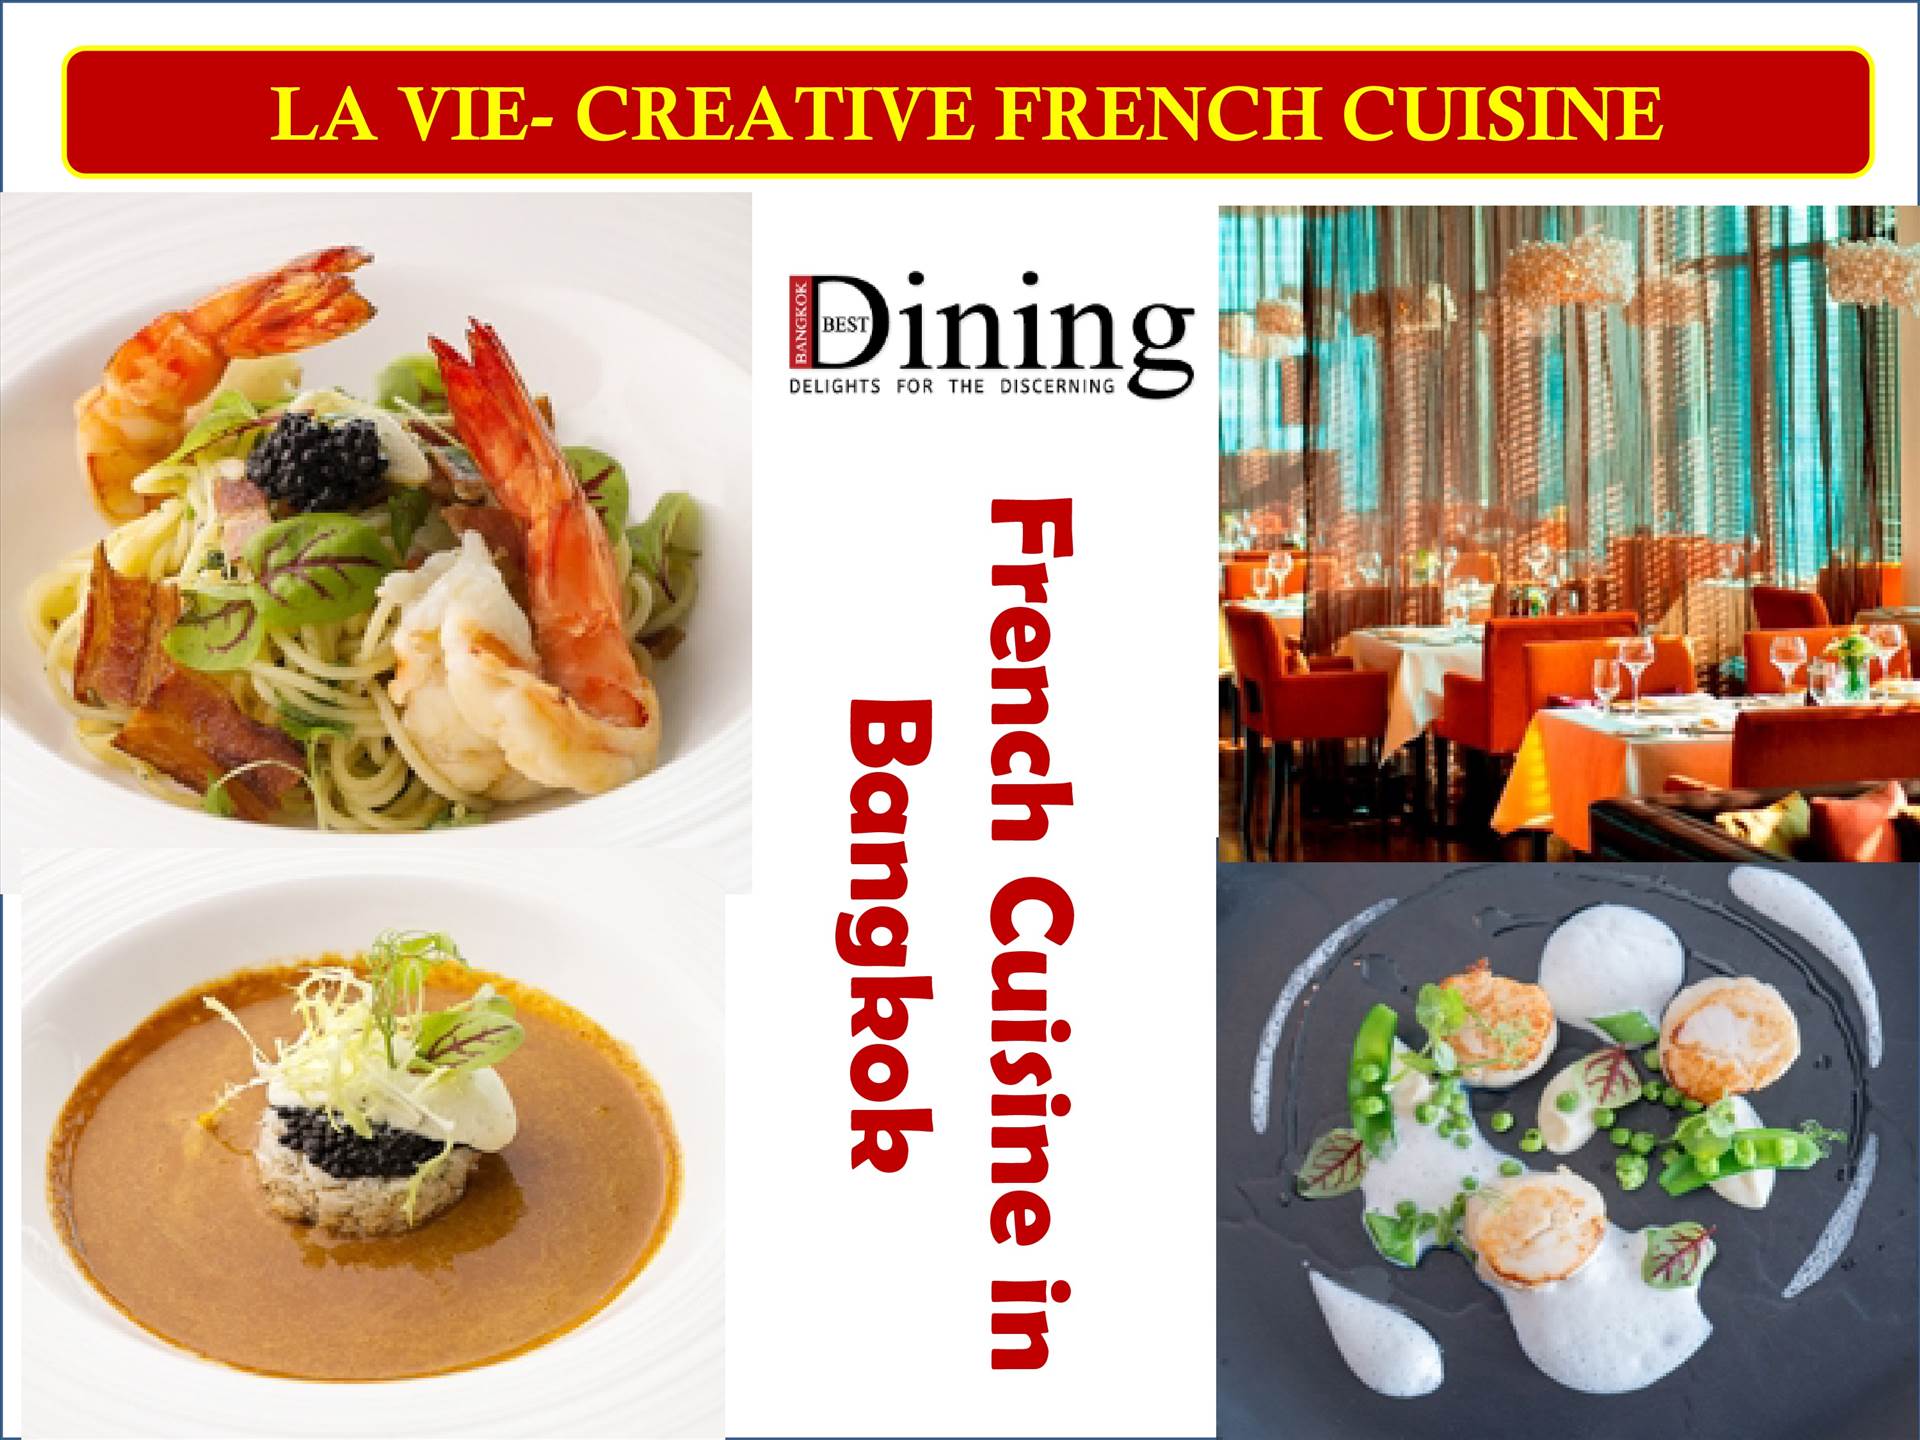 Fine Quality French cuisine in Bangkok Know more information about this venue, click here http://www.bangkokbestdining.com/review-details.php?alias=la-vie.
 by bangkokbestdining